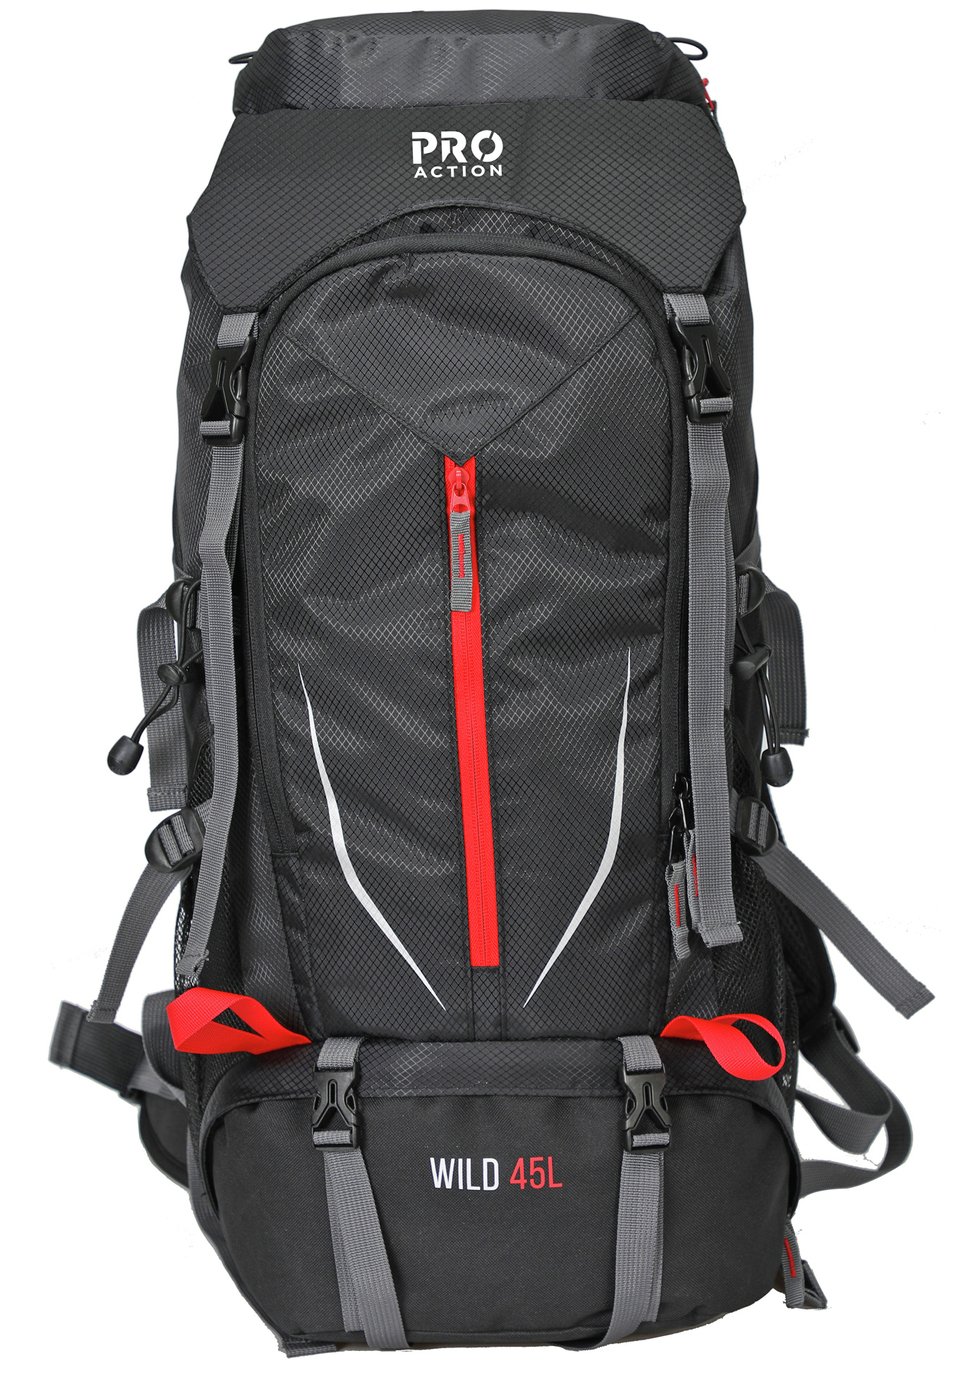 ProAction Wild 45L Backpack Review